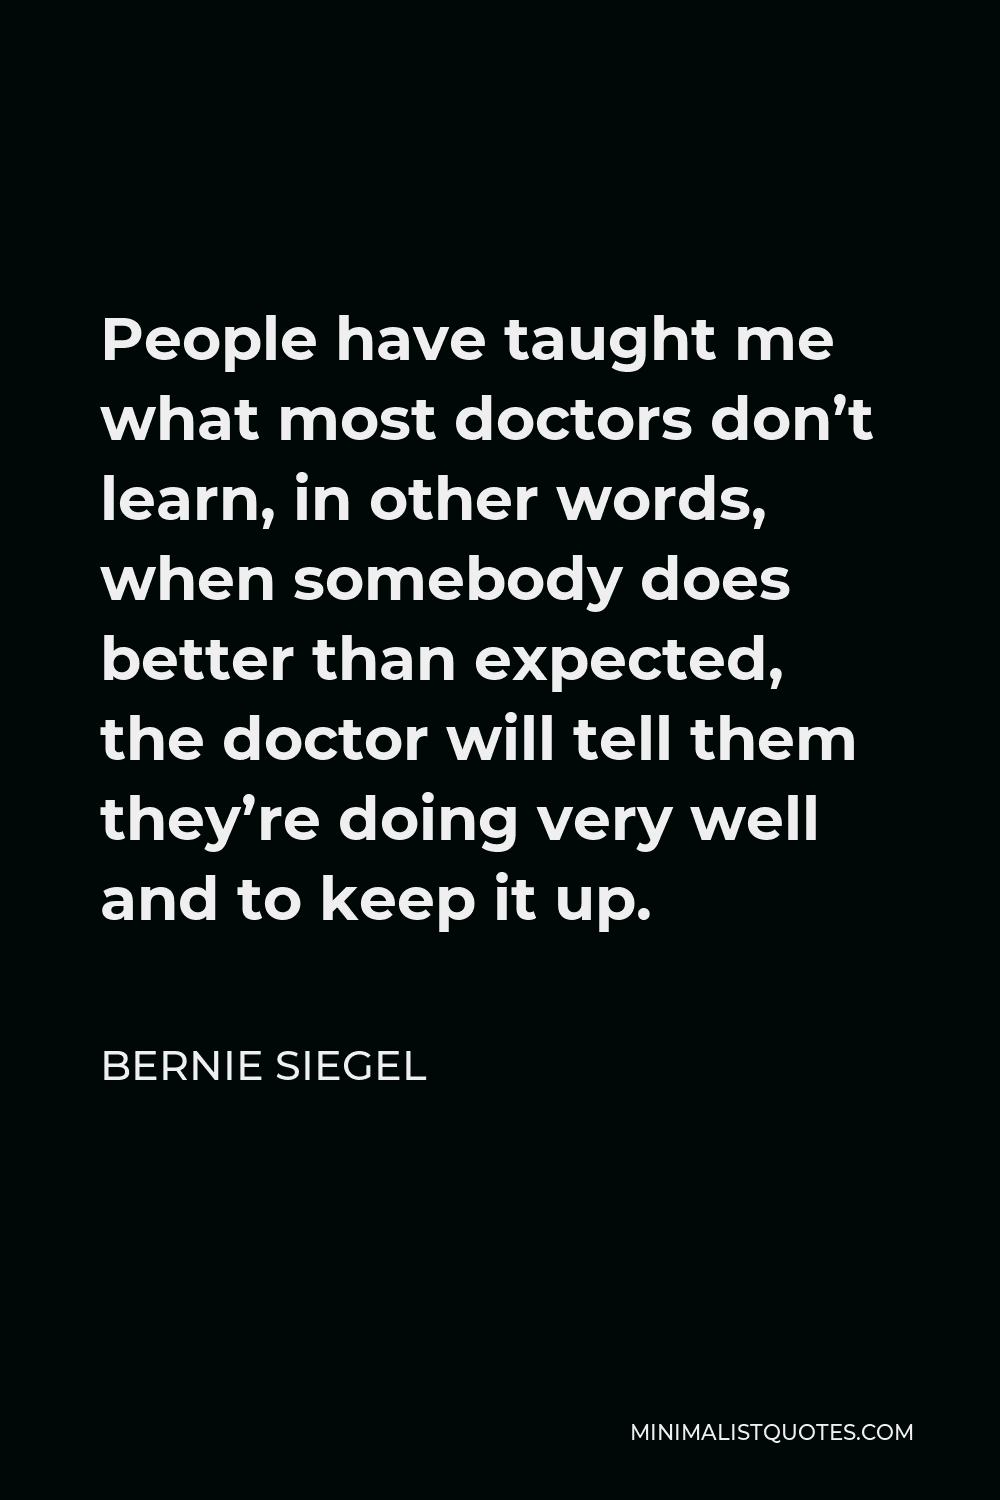 Bernie Siegel Quote - People have taught me what most doctors don’t learn, in other words, when somebody does better than expected, the doctor will tell them they’re doing very well and to keep it up.